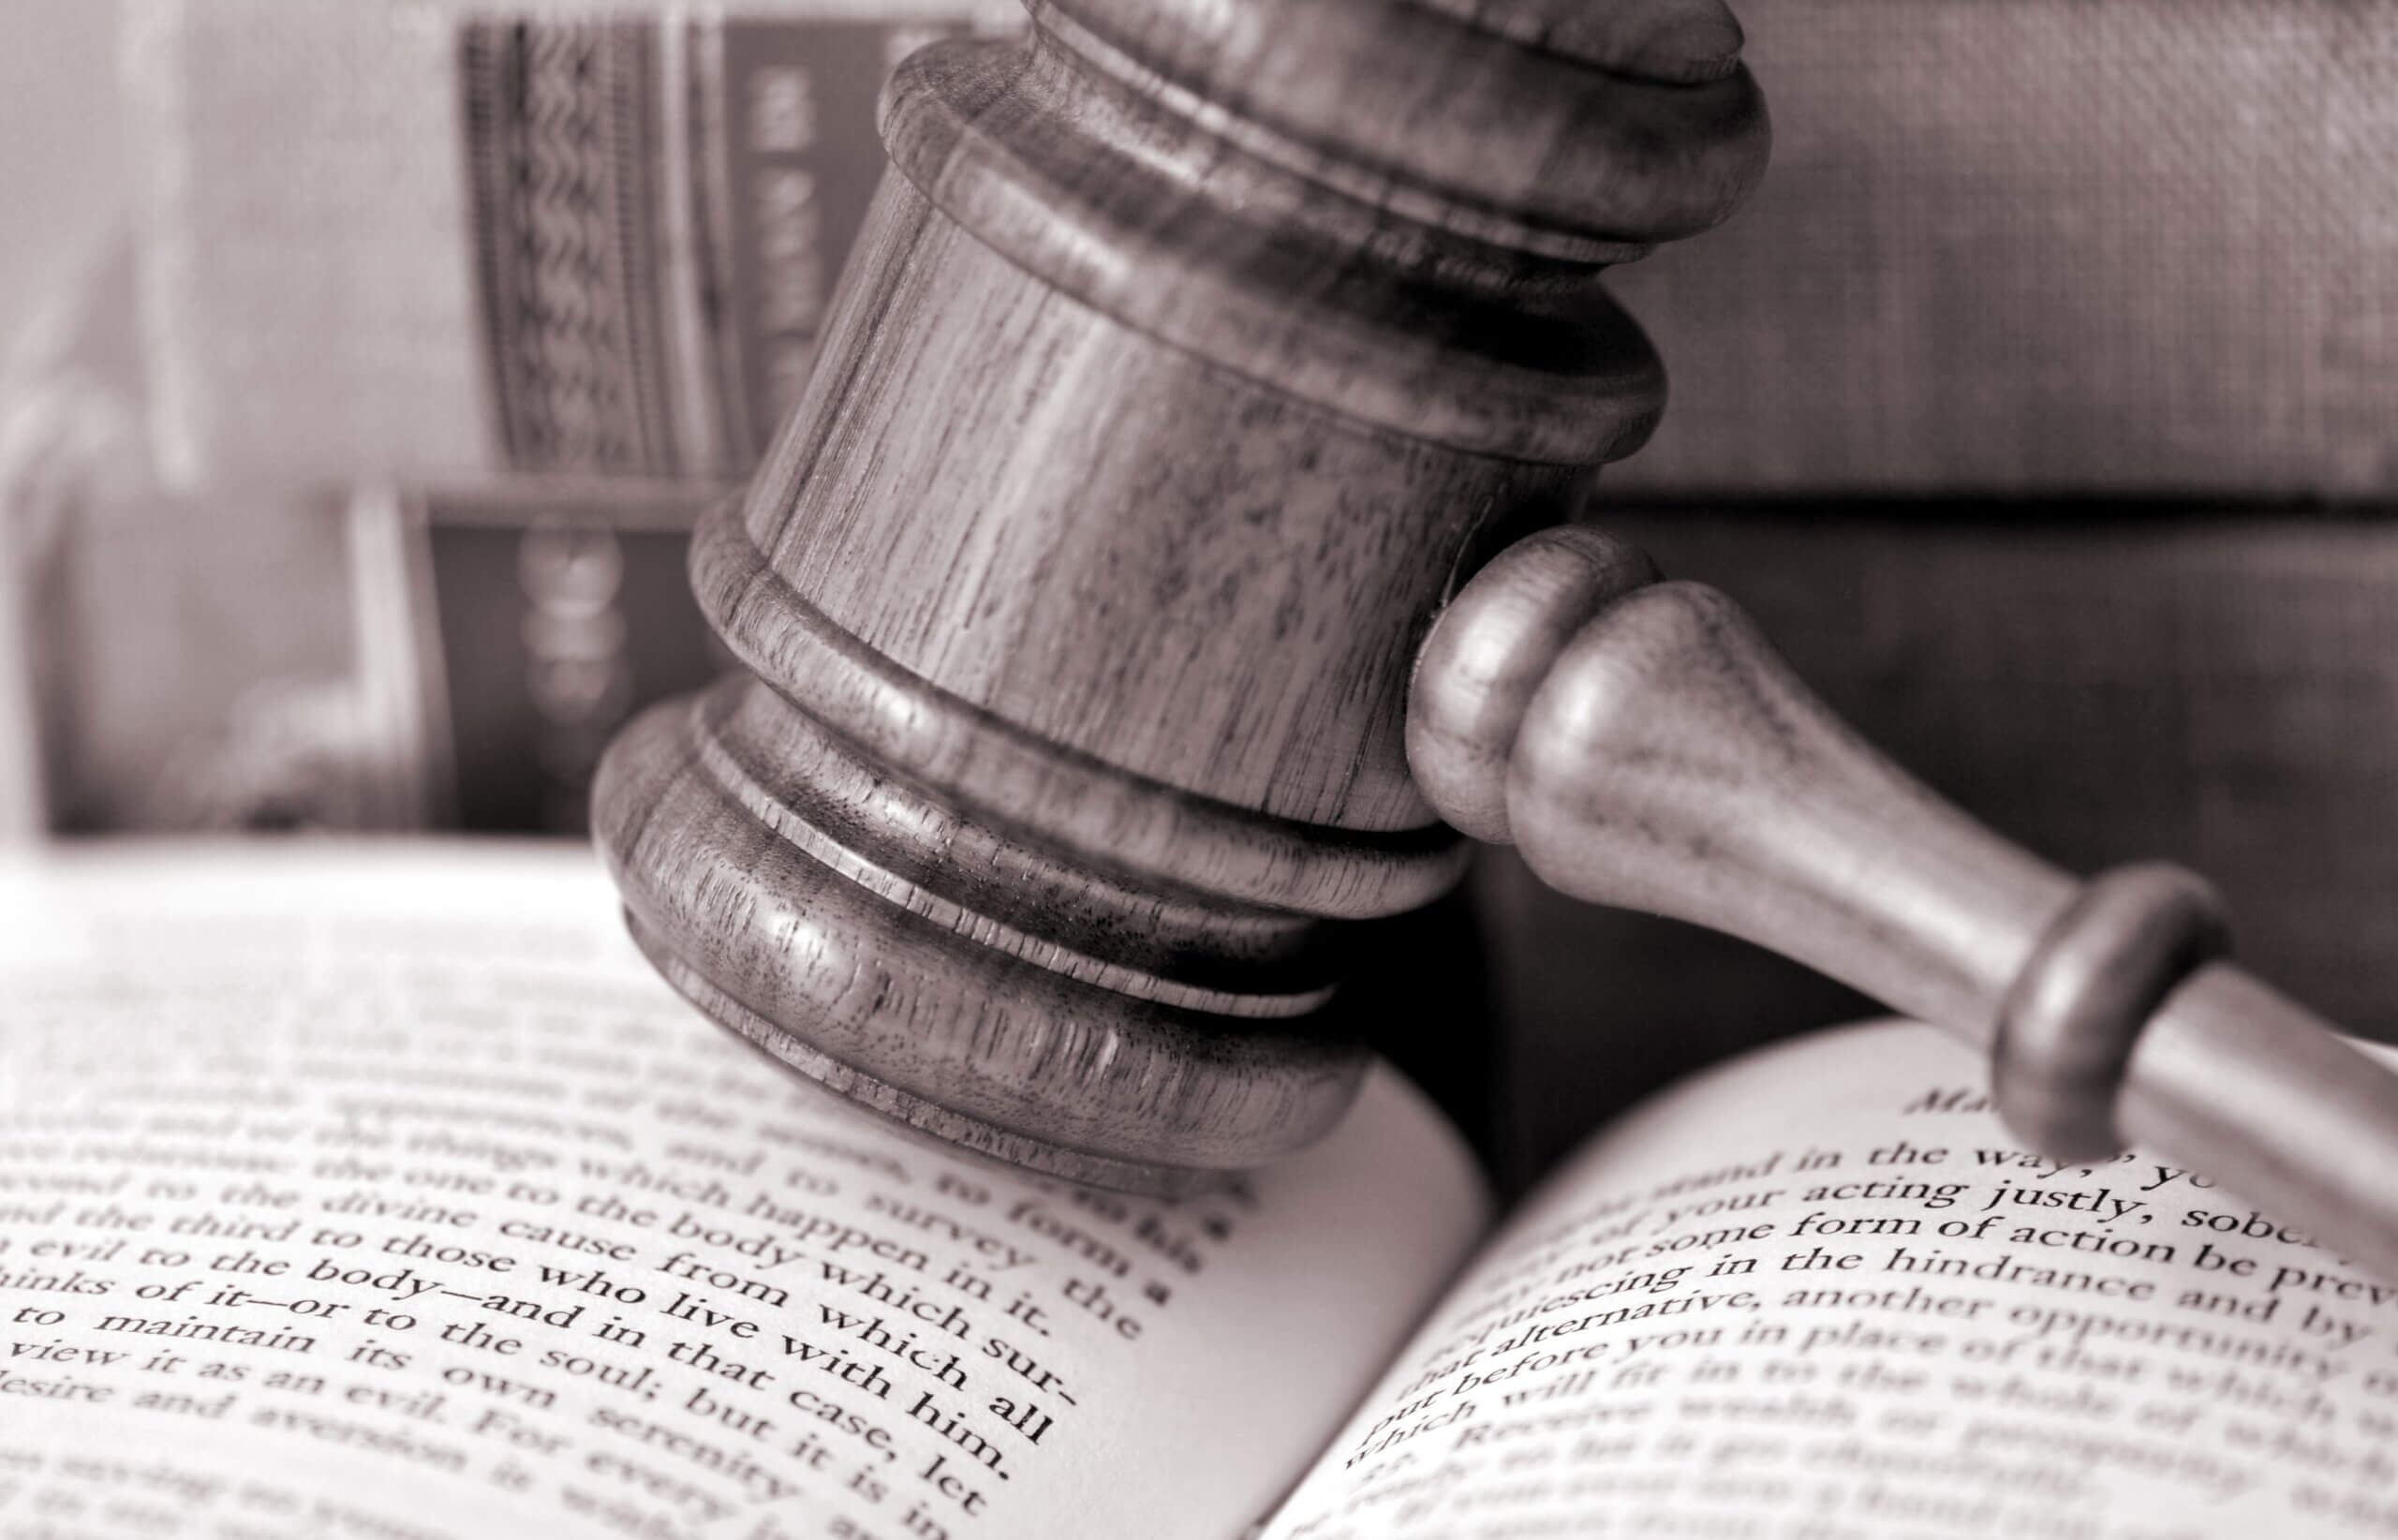 Tampa HOA FAQs - gavel rests upon an open text